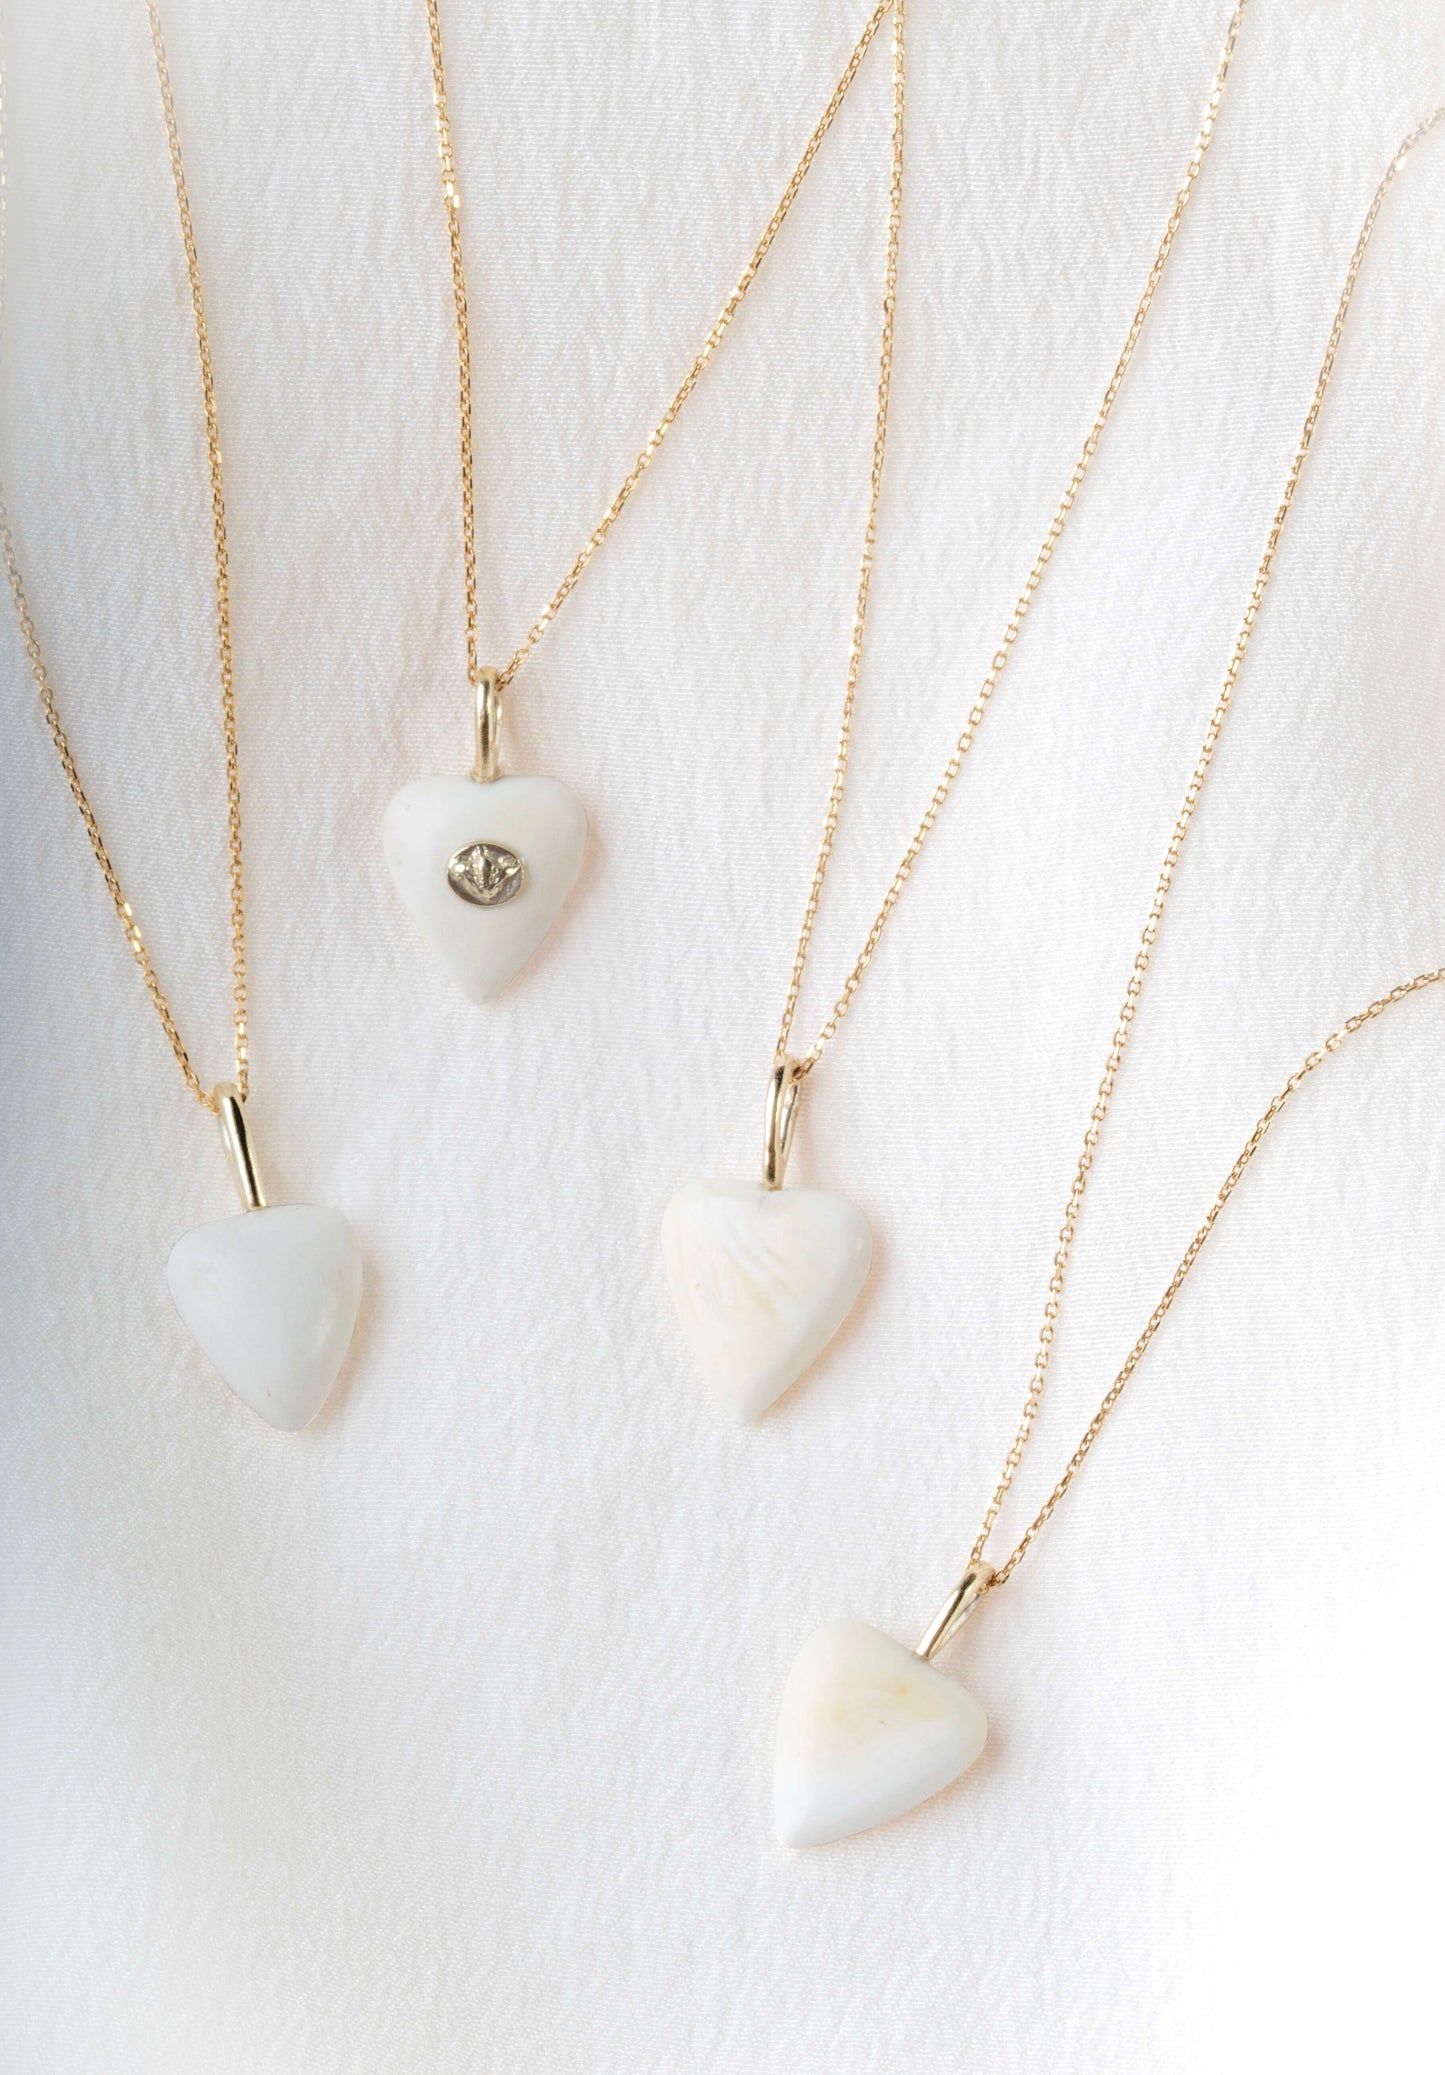 Necklace - Amber's White Heart